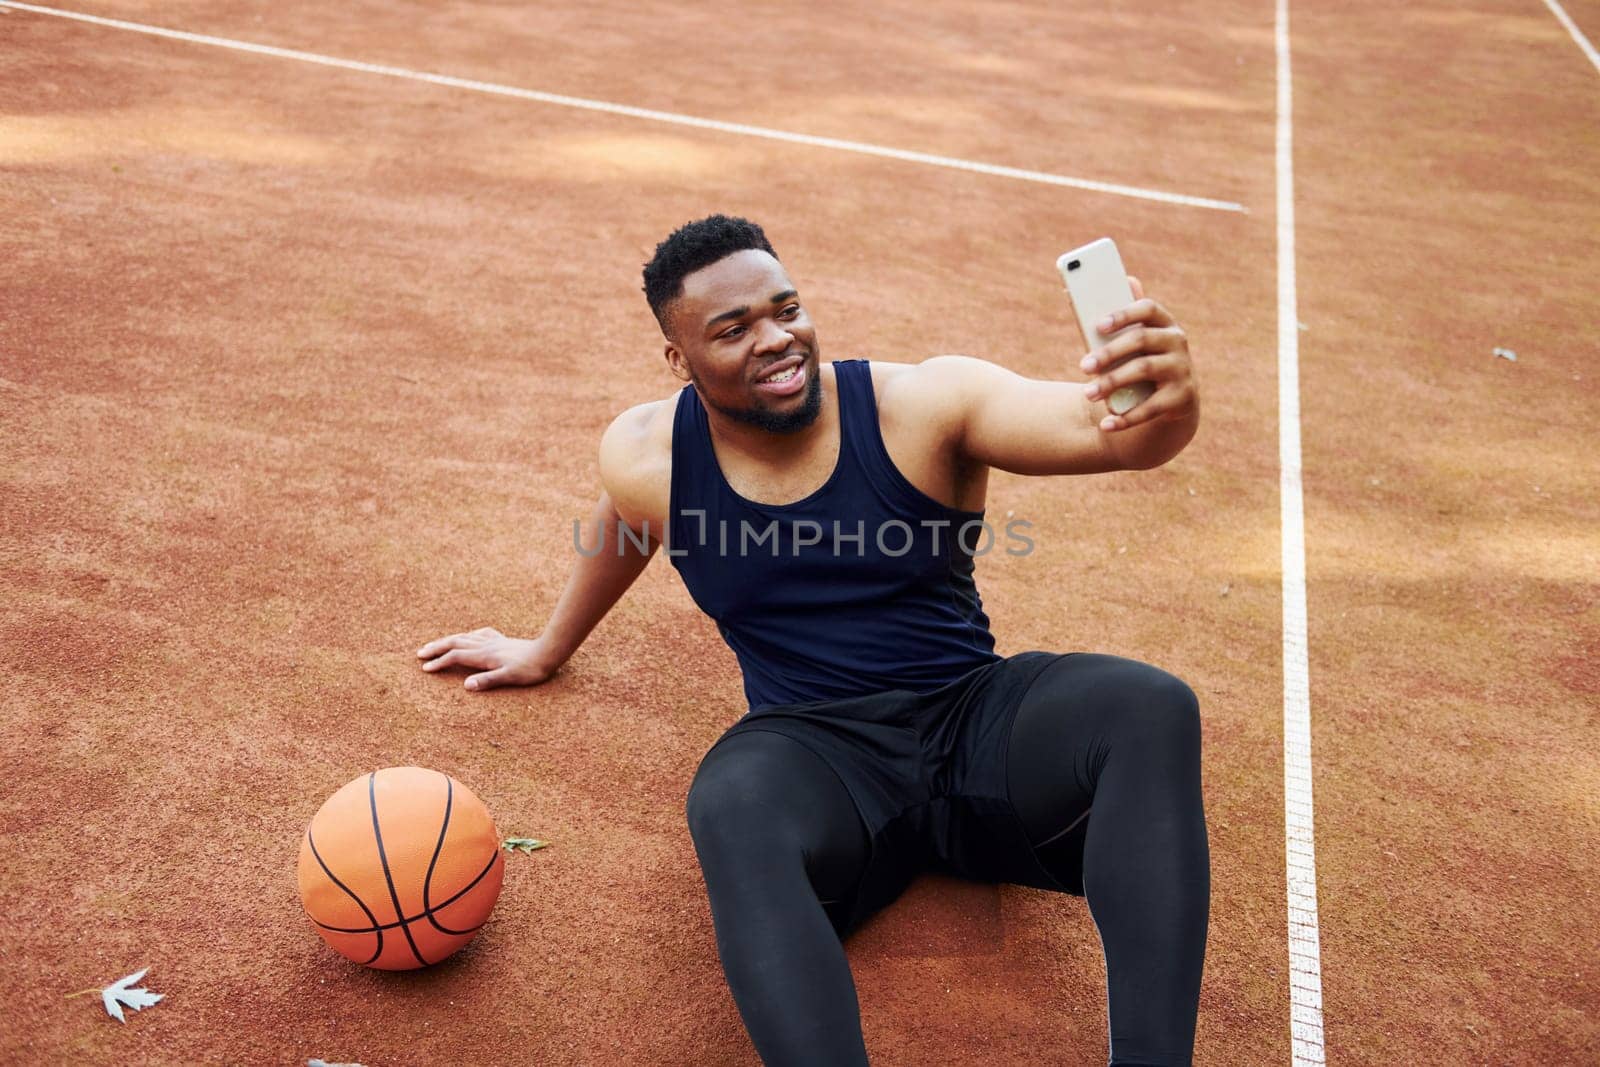 Making selfie. African american man plays basketball on the court outdoors by Standret